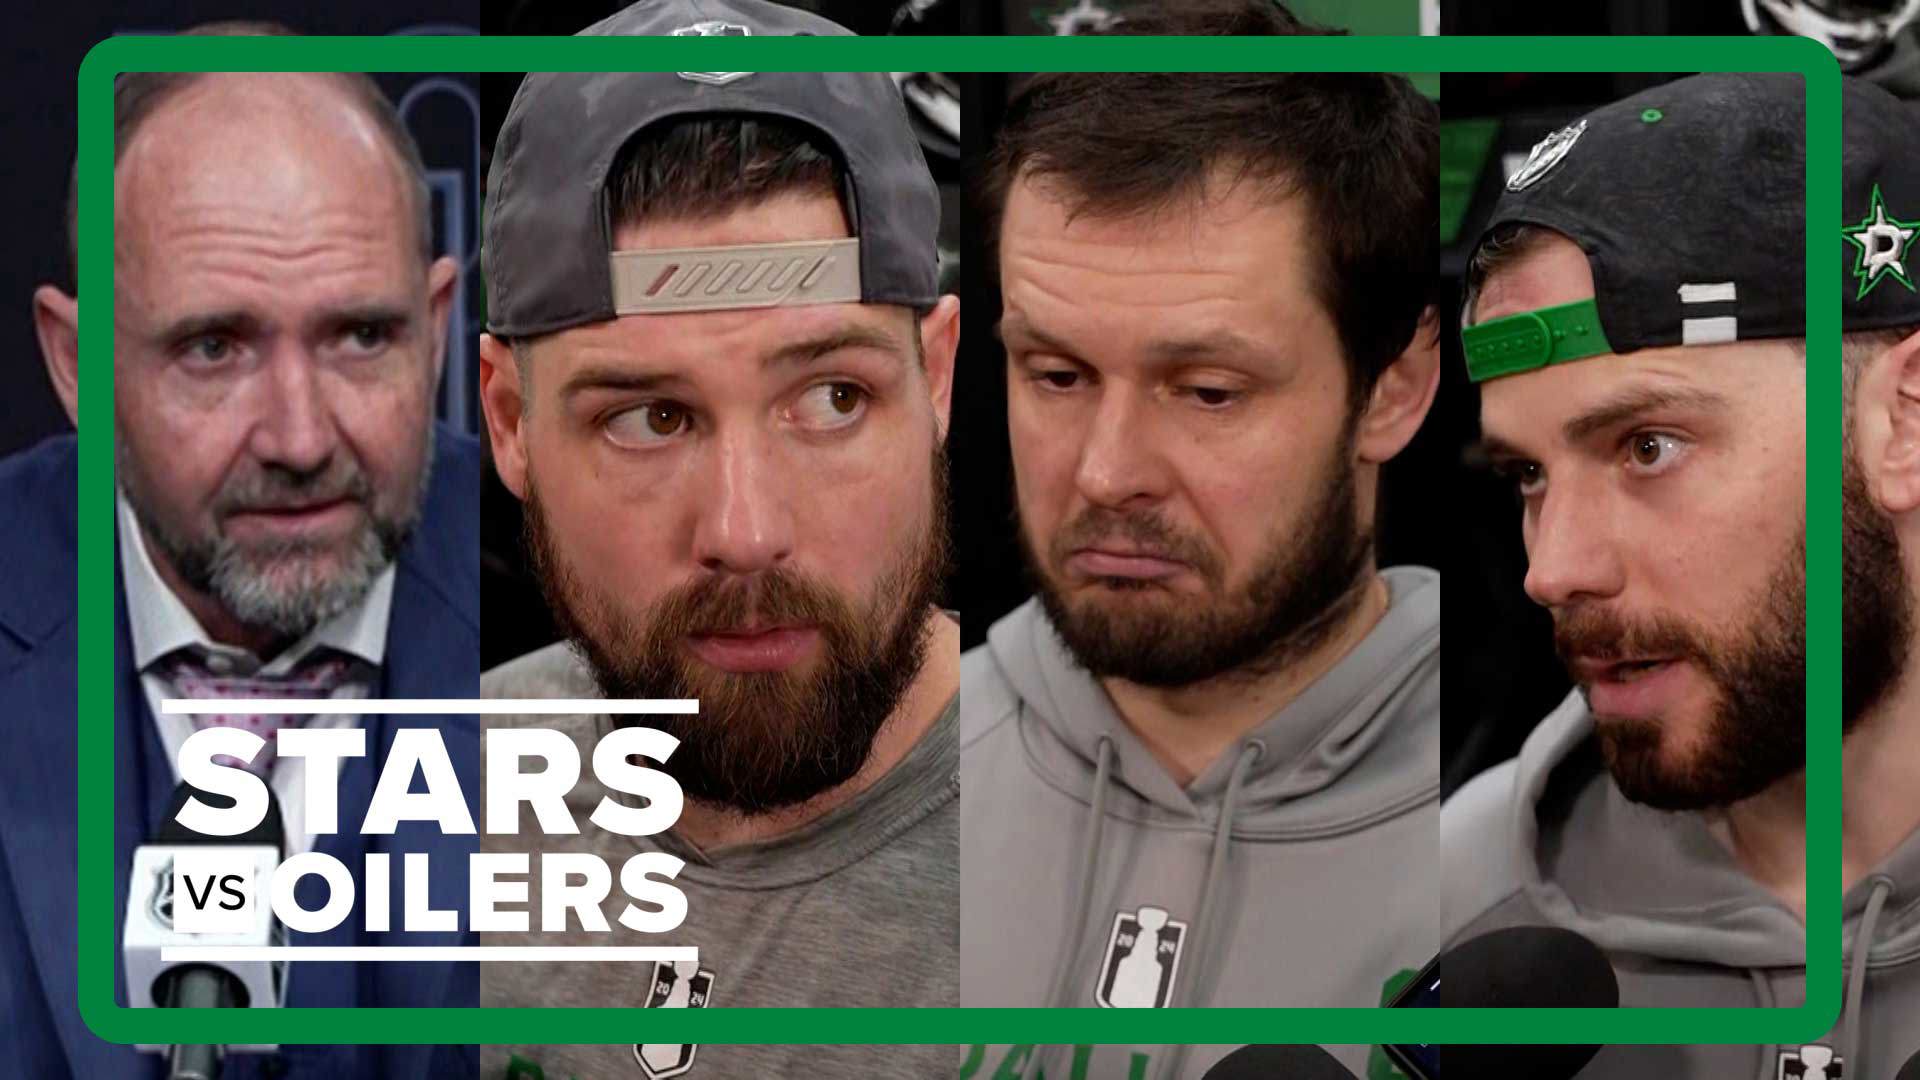 Dallas Stars players Tyler Seguin, Evgenii Dadonov and Jamie Benn, and coach Pete DeBoer, react post-game to the team's seventh straight Game 1 playoff loss.